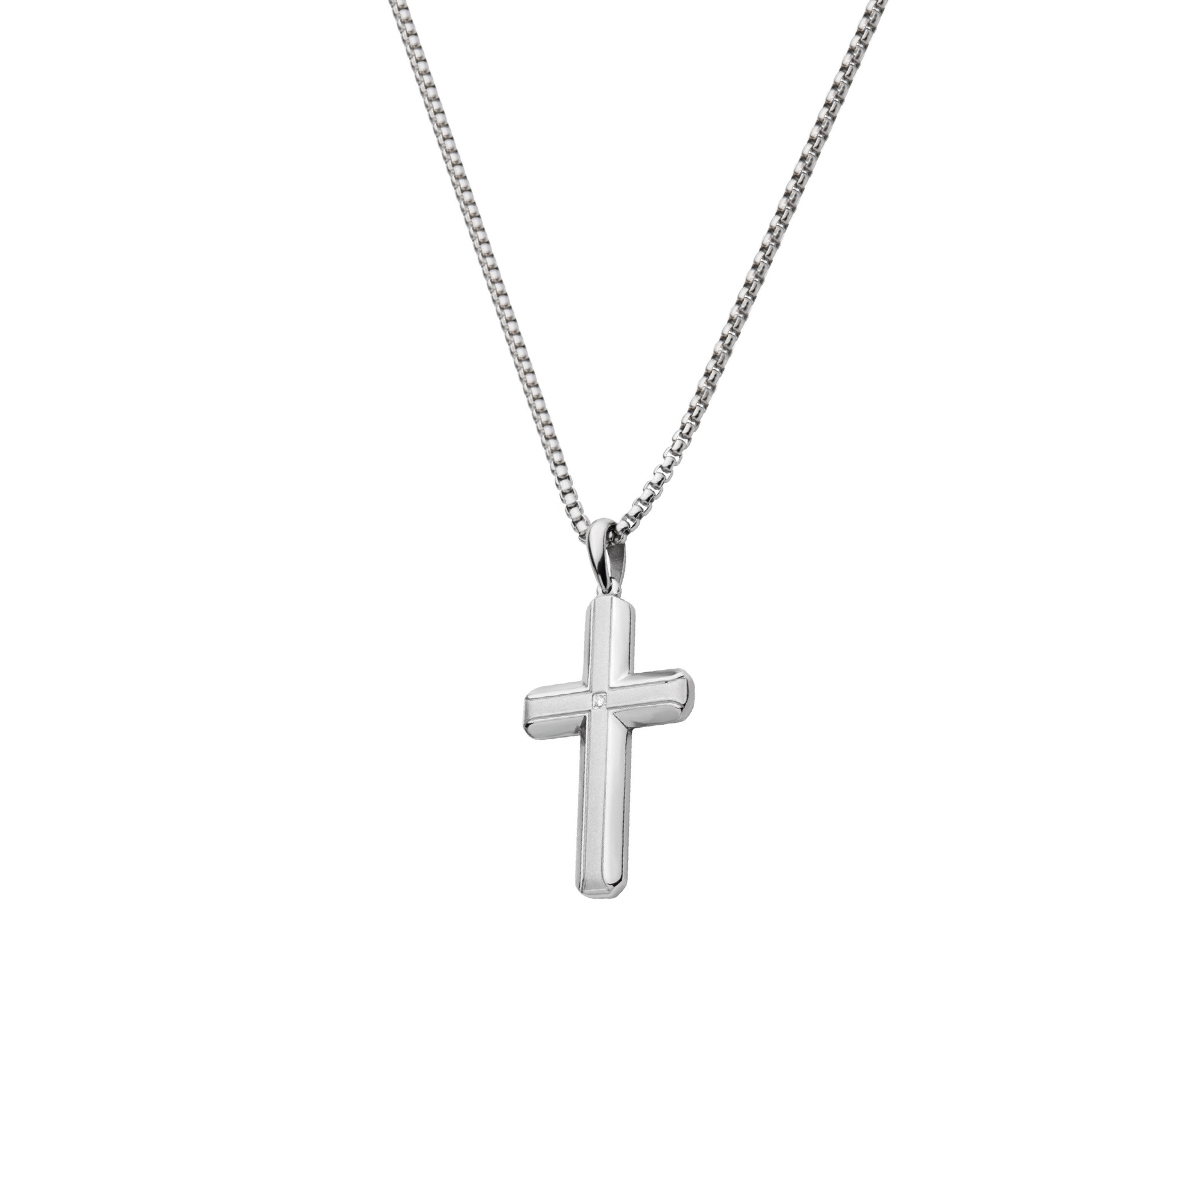 Stainless Steel Diamond Cross and 24" Inch Chain